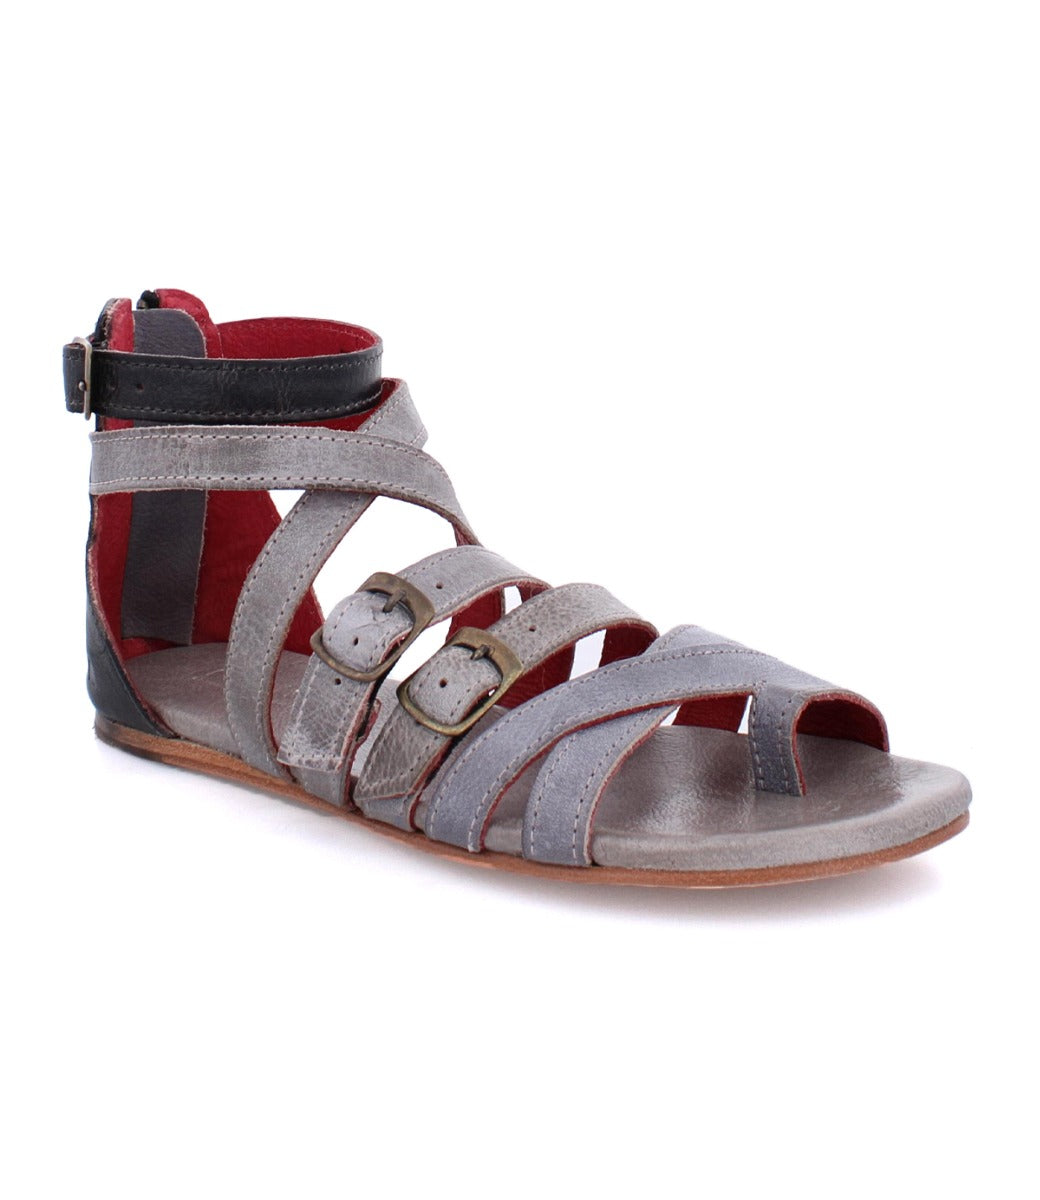 A women's Miya grey pure leather sandal by Bed Stu with straps and buckles.